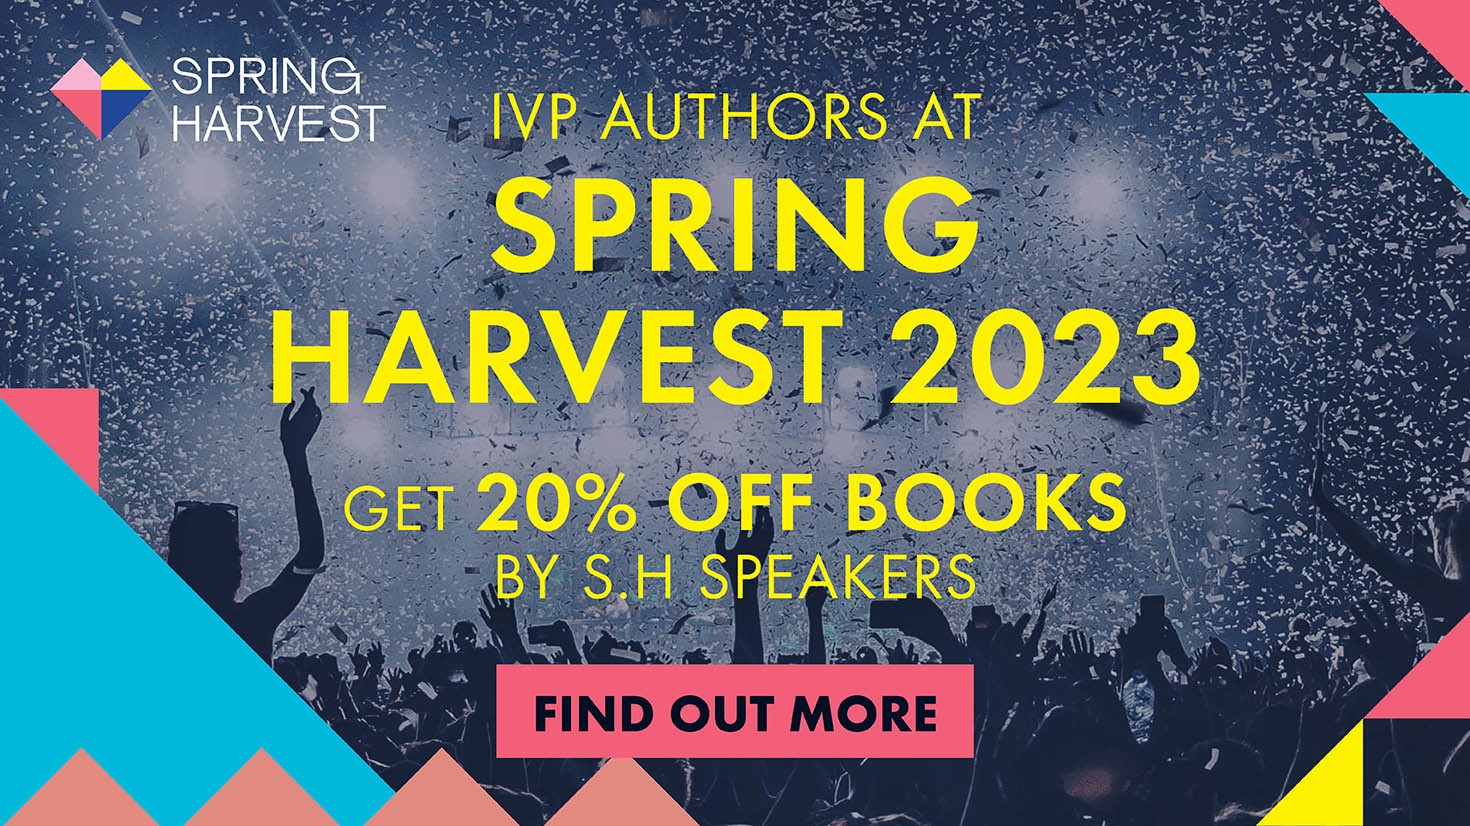 IVP Authors at Spring Harvest 2023